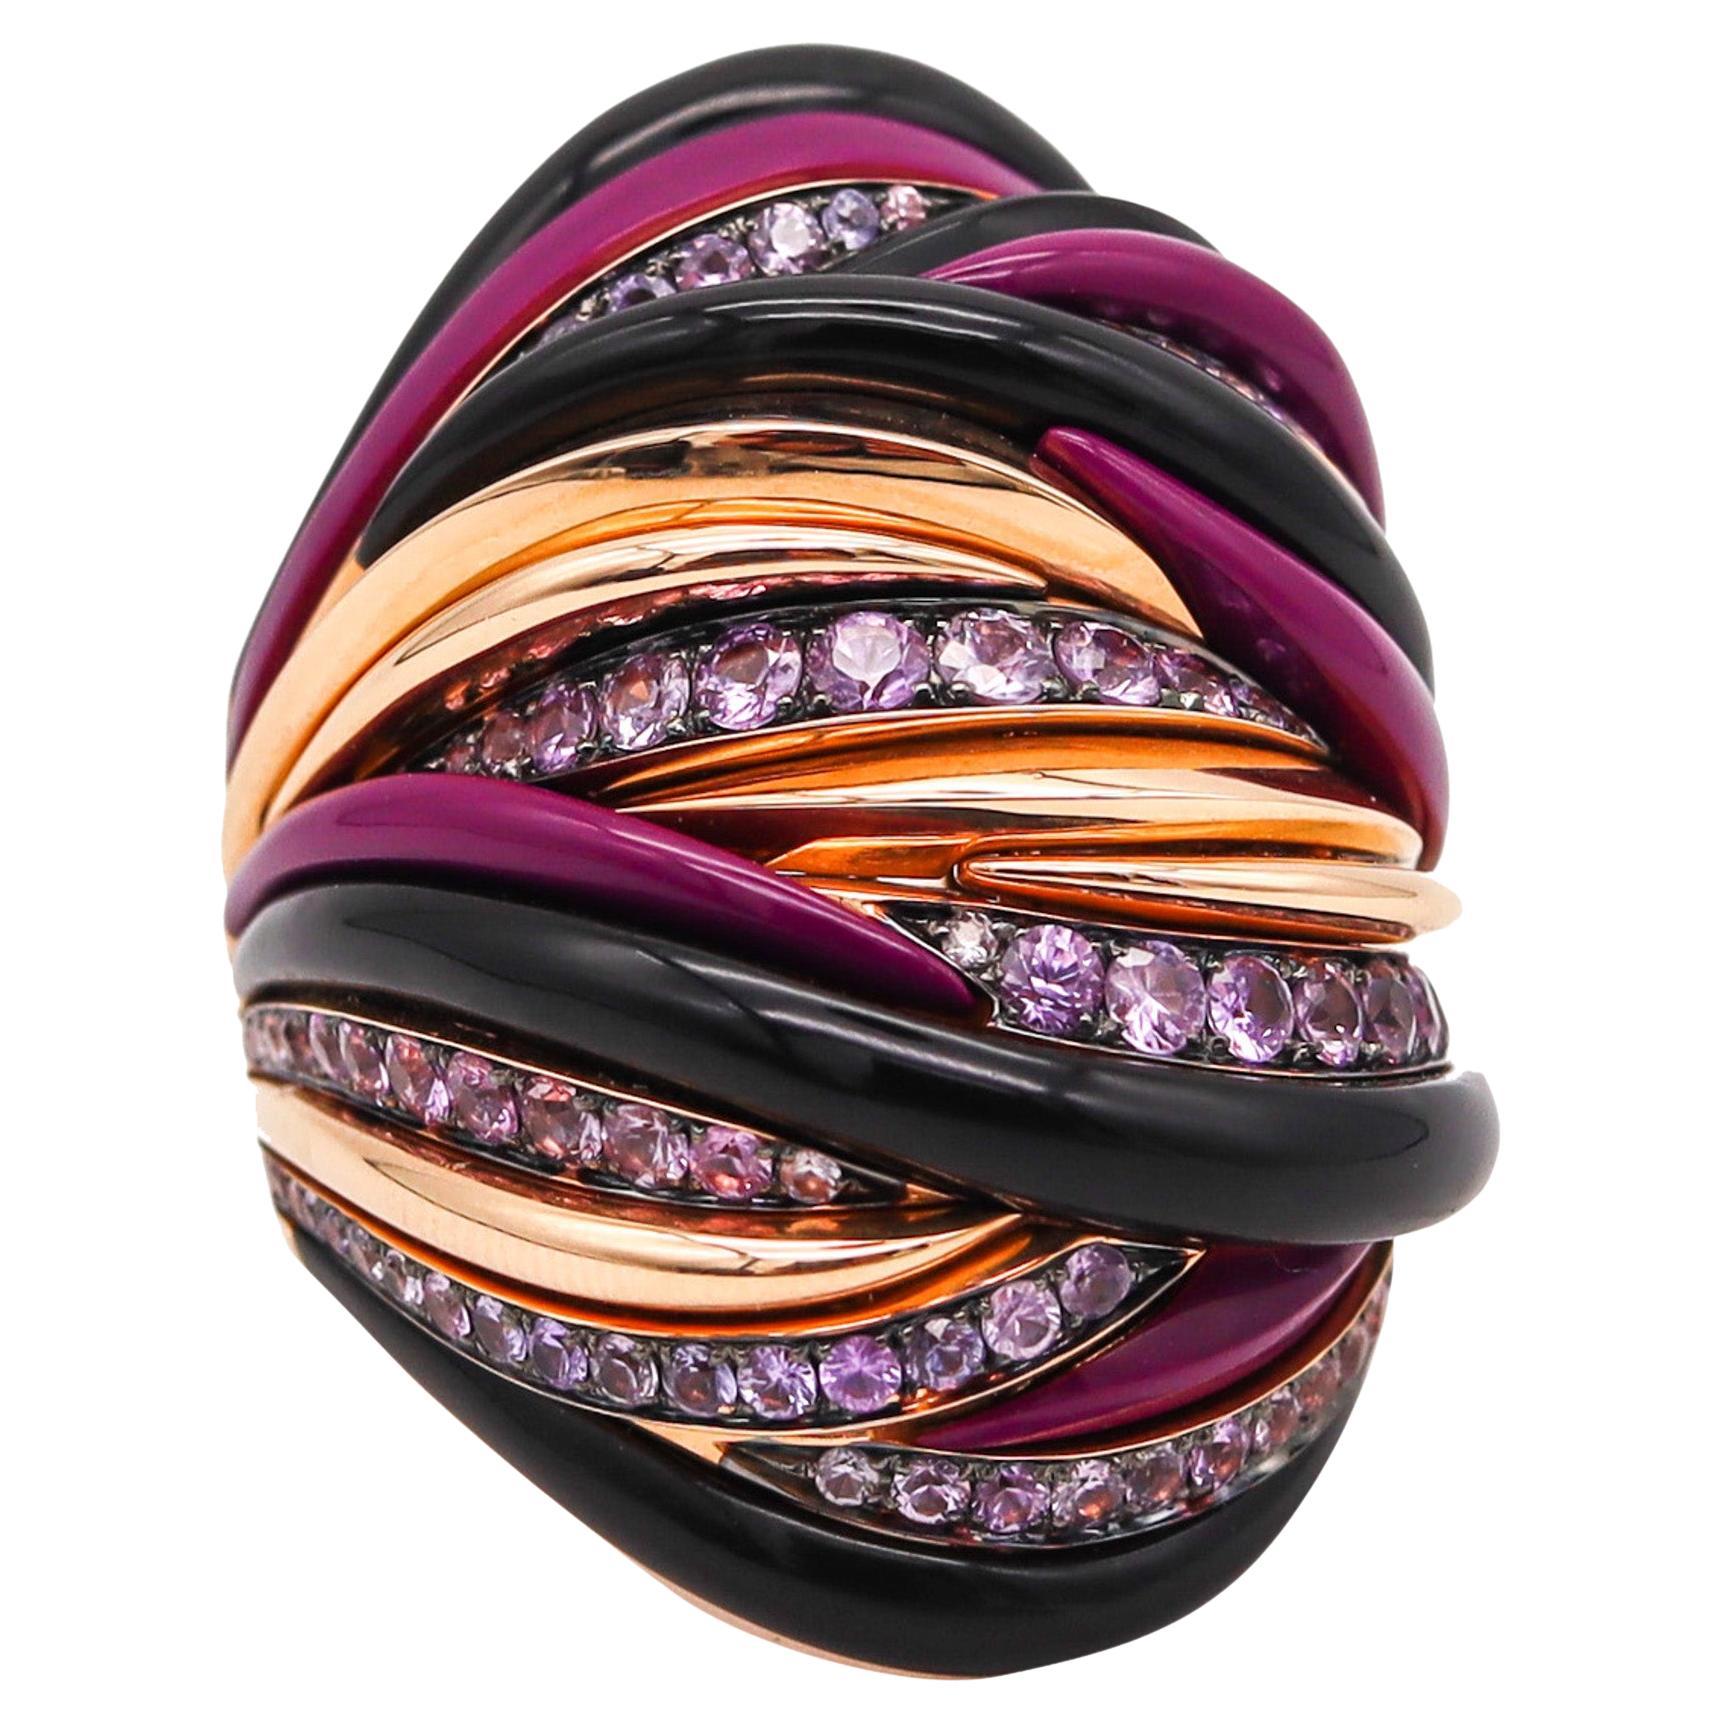 Fawaz Gruosi Sculptural Cocktail Ring in 18kt Gold 3.72ctw in Purple Sapphires For Sale